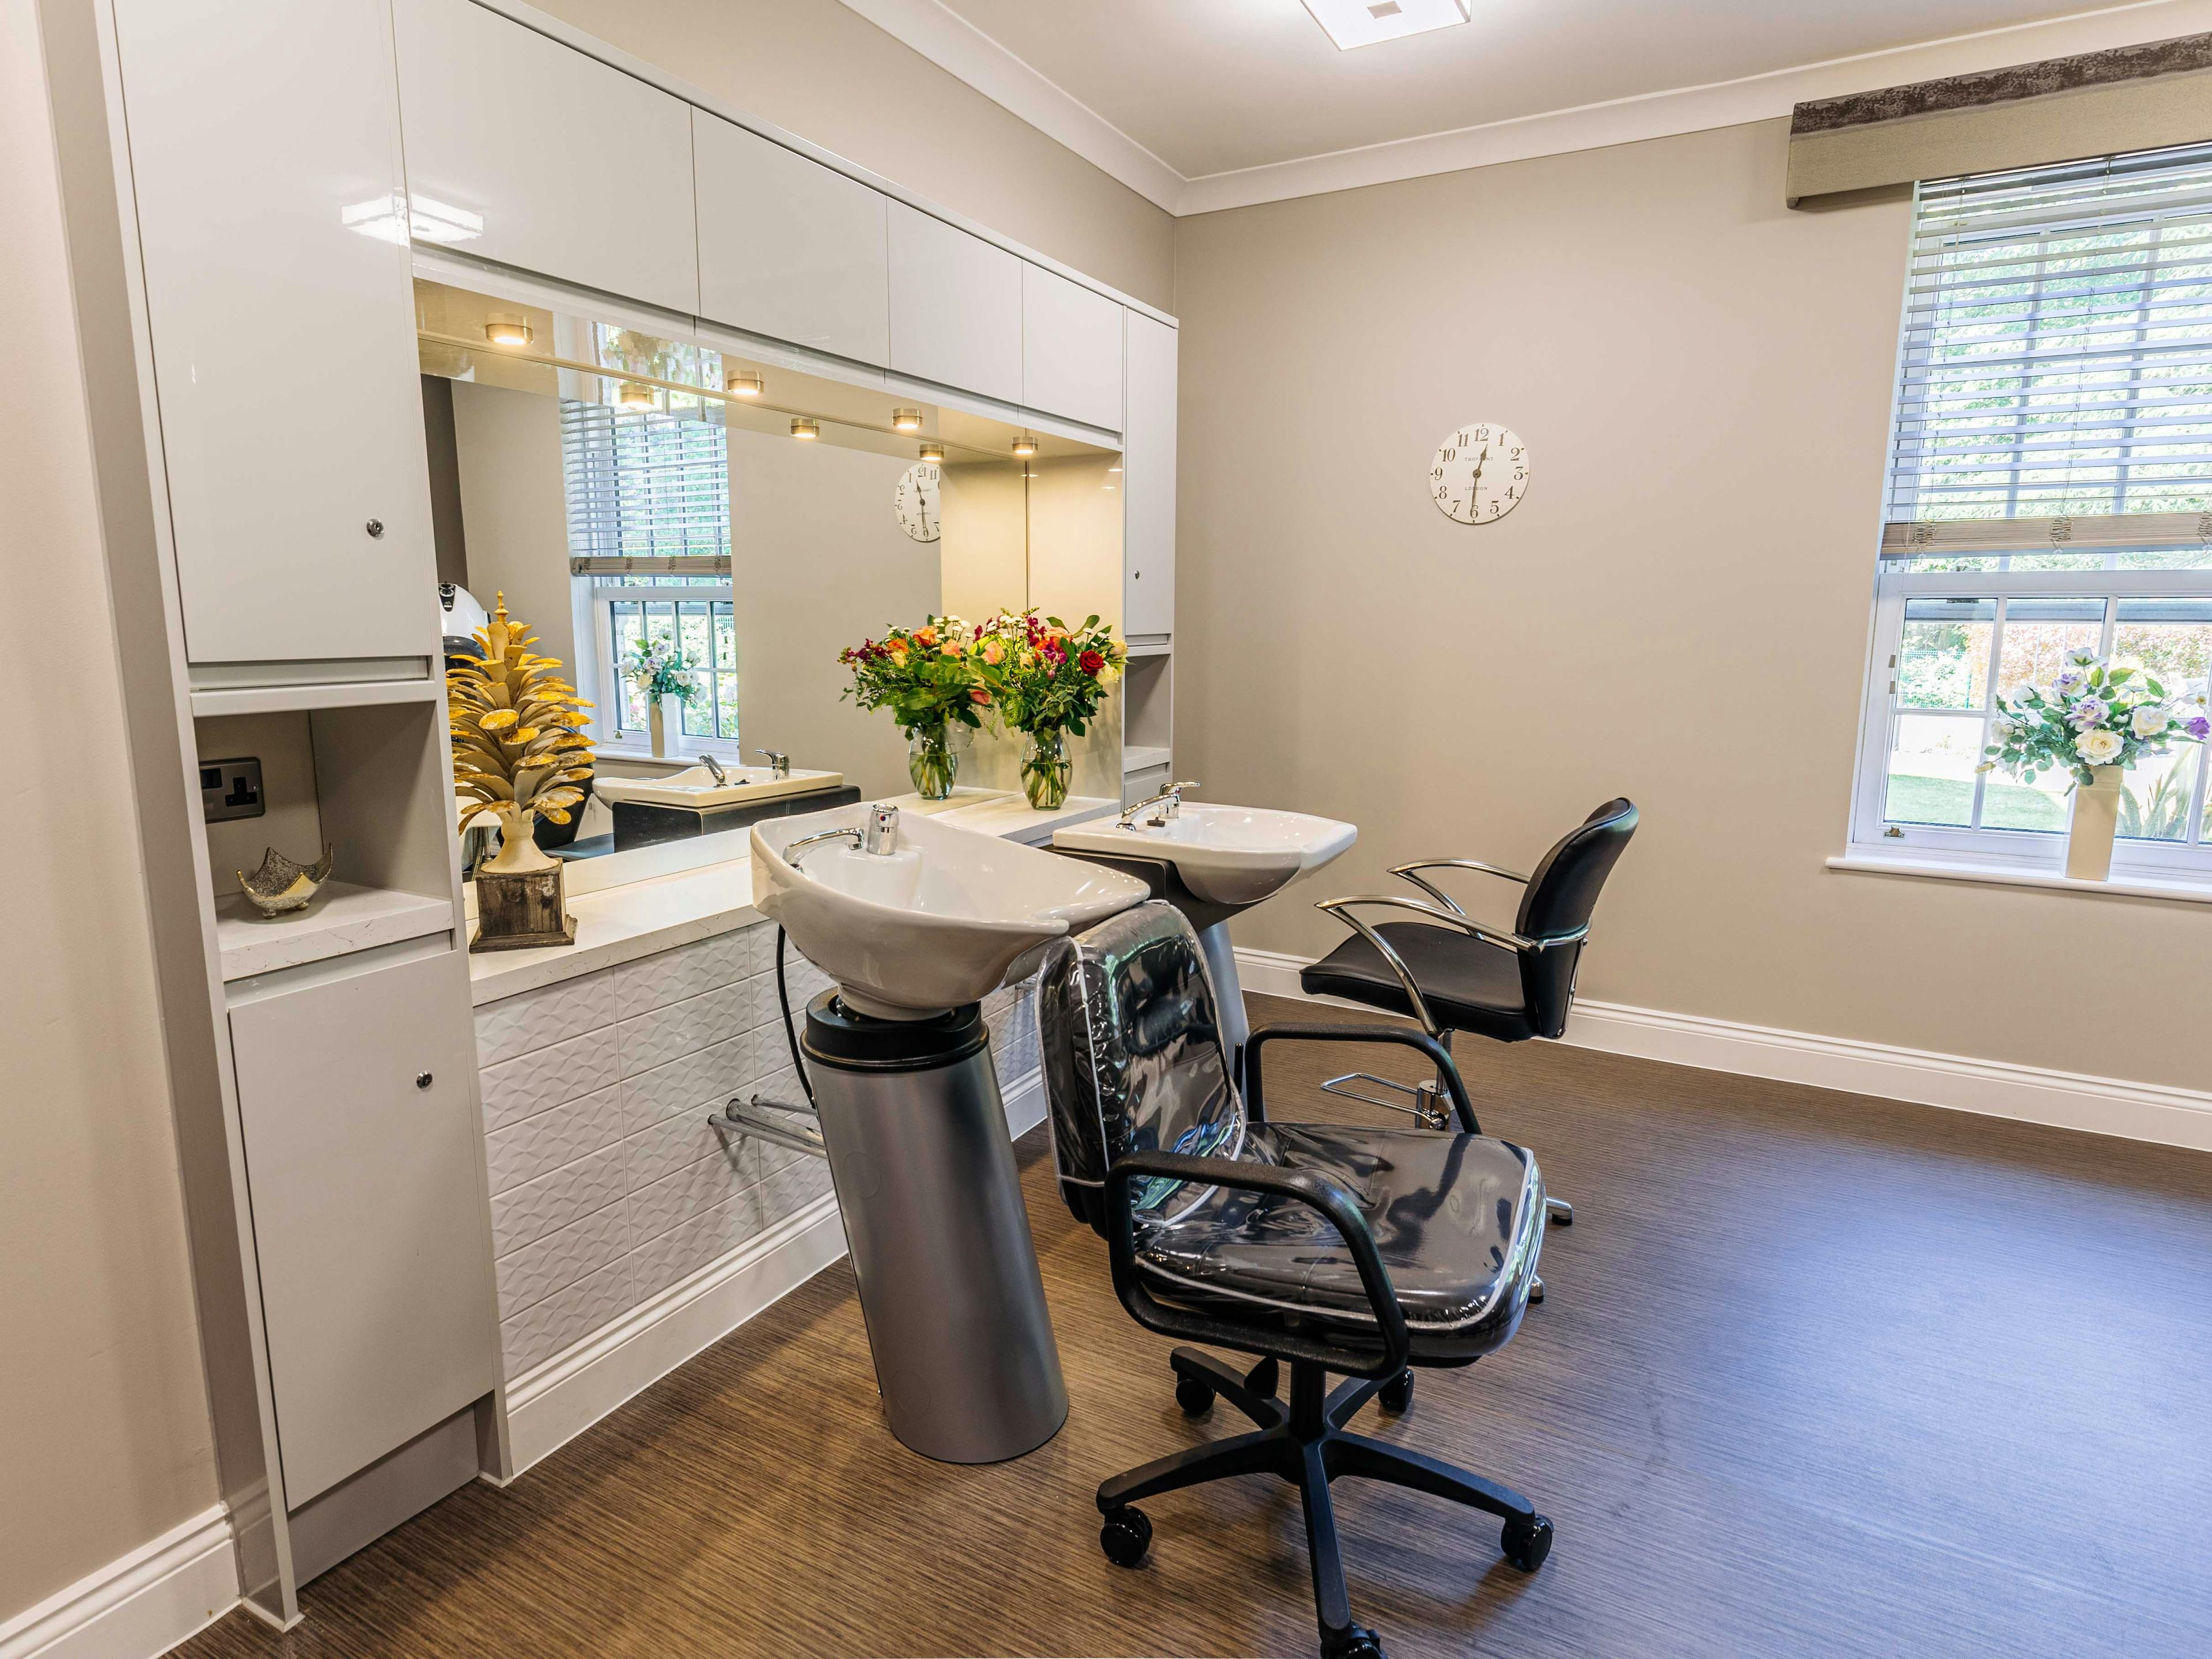 Salon at at Worplesdon View Care Home in Guildford, Surrey